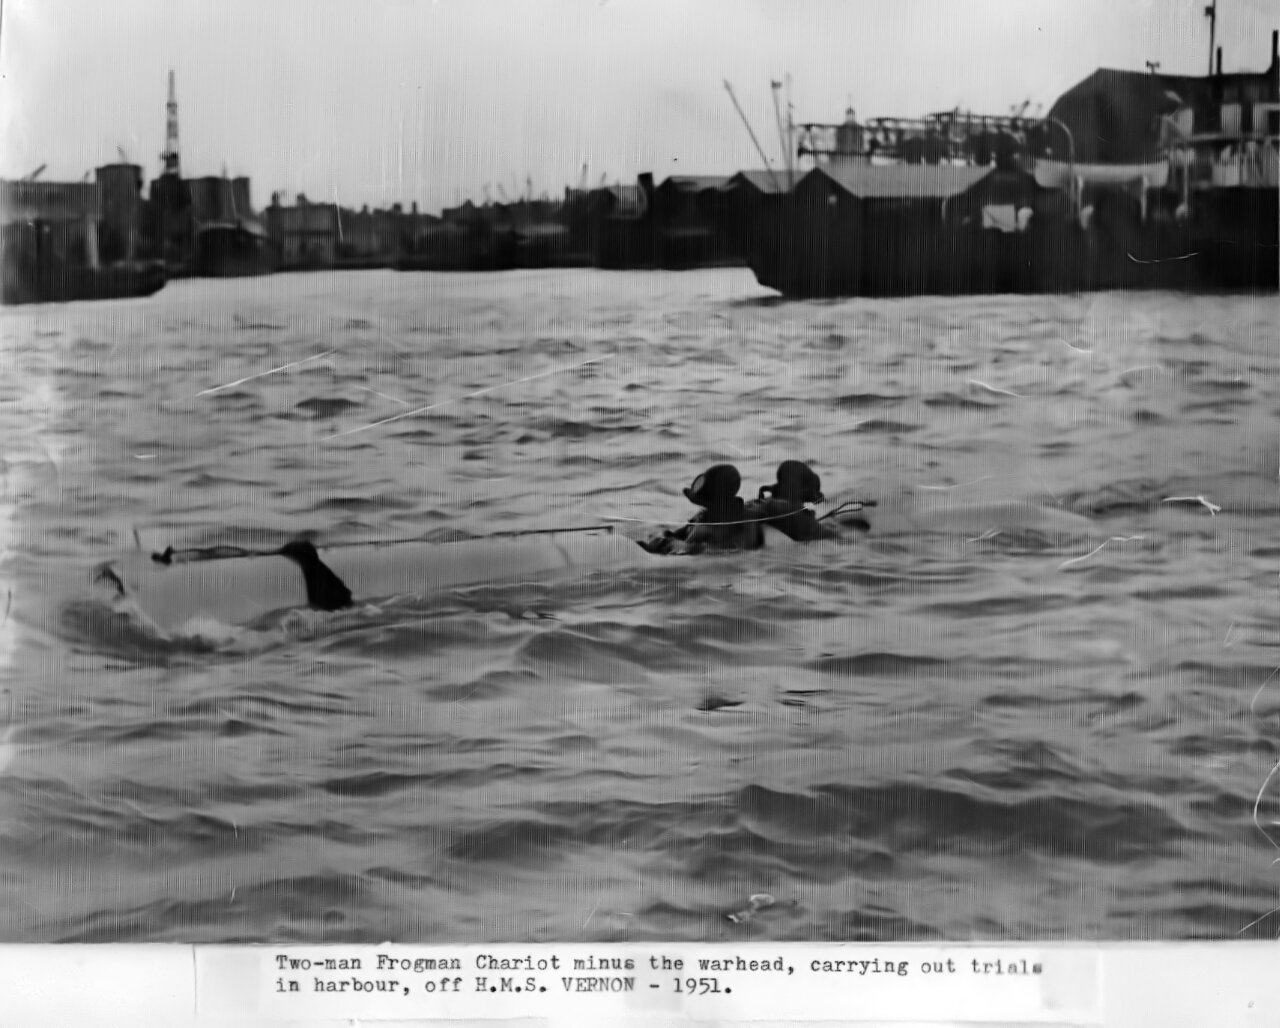 Chariot two-man human torpedo in Portsmouth harbour off HMS VERNON